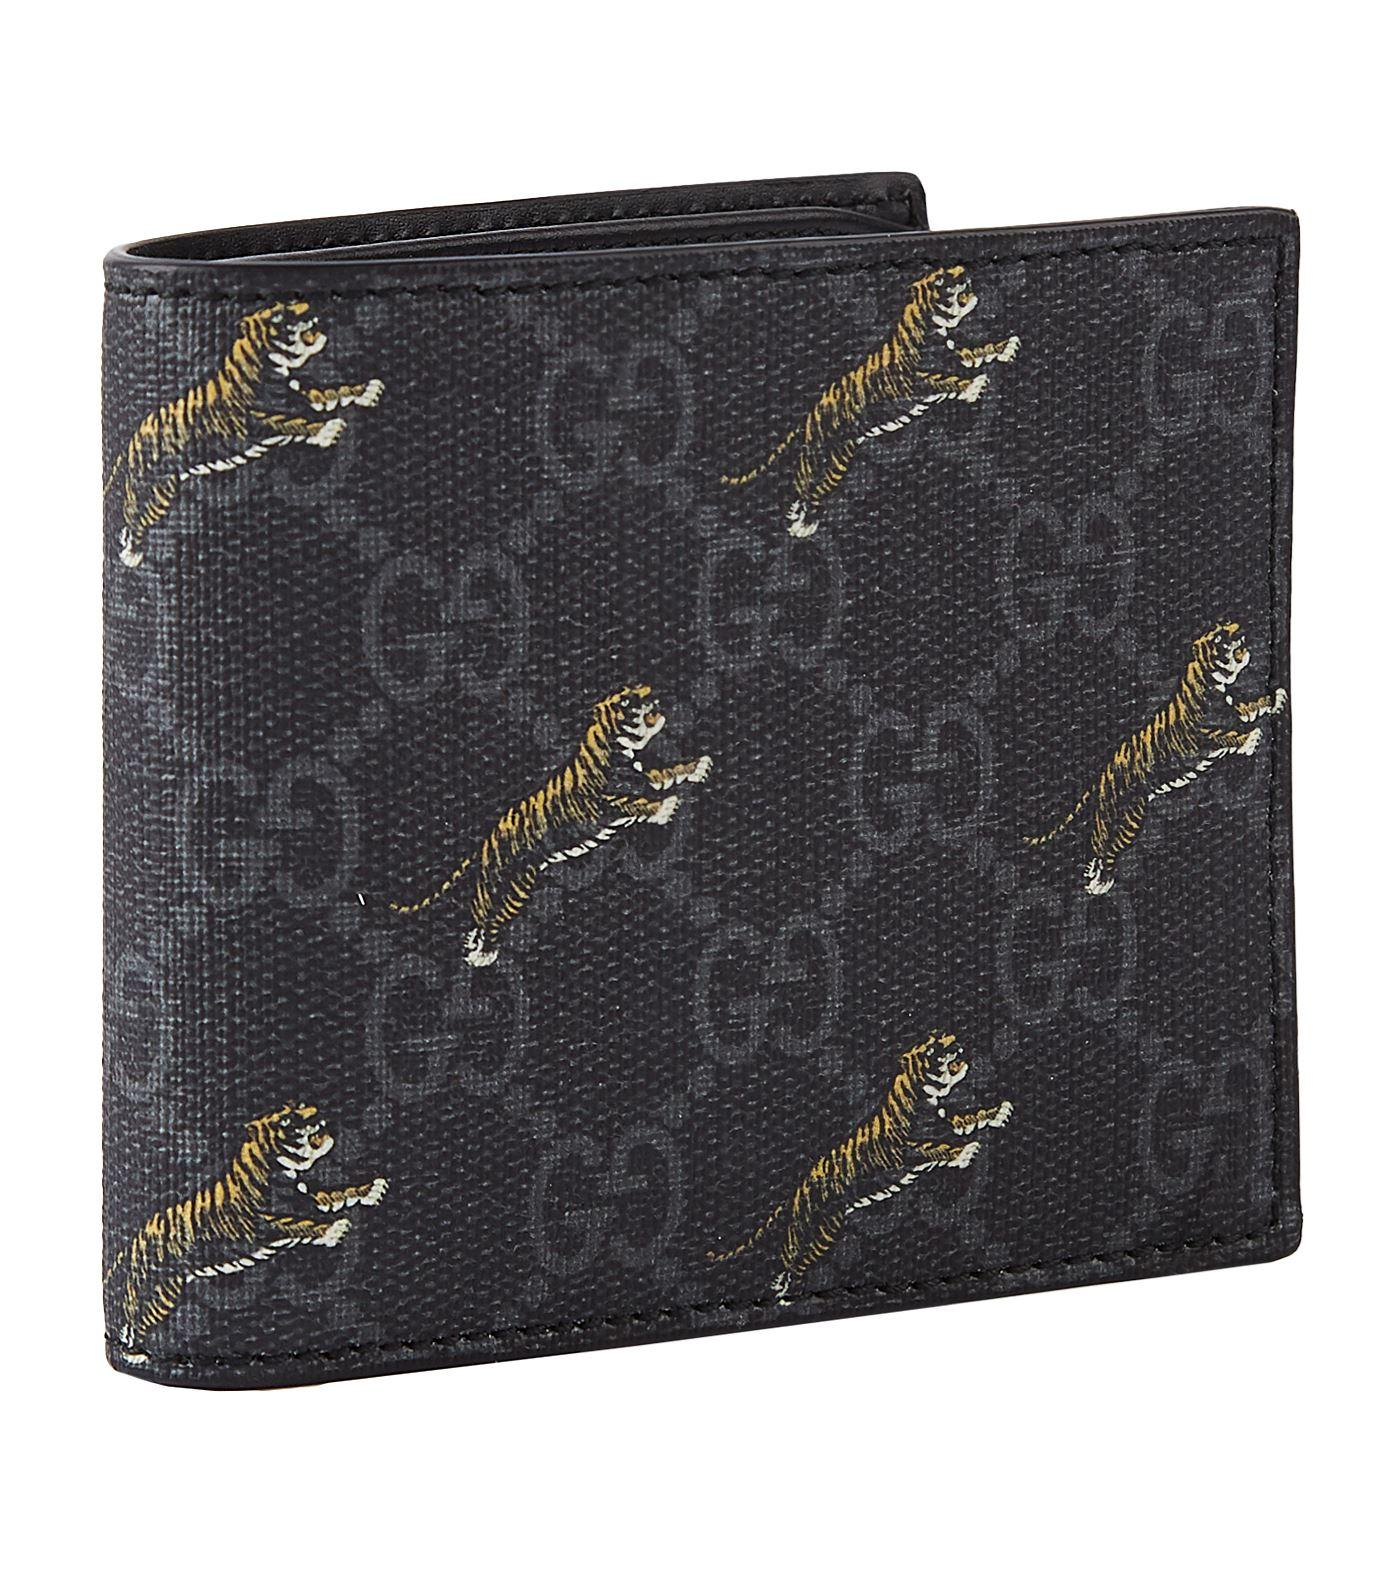 Gucci Purse Wallet Uk Size | Literacy Ontario Central South